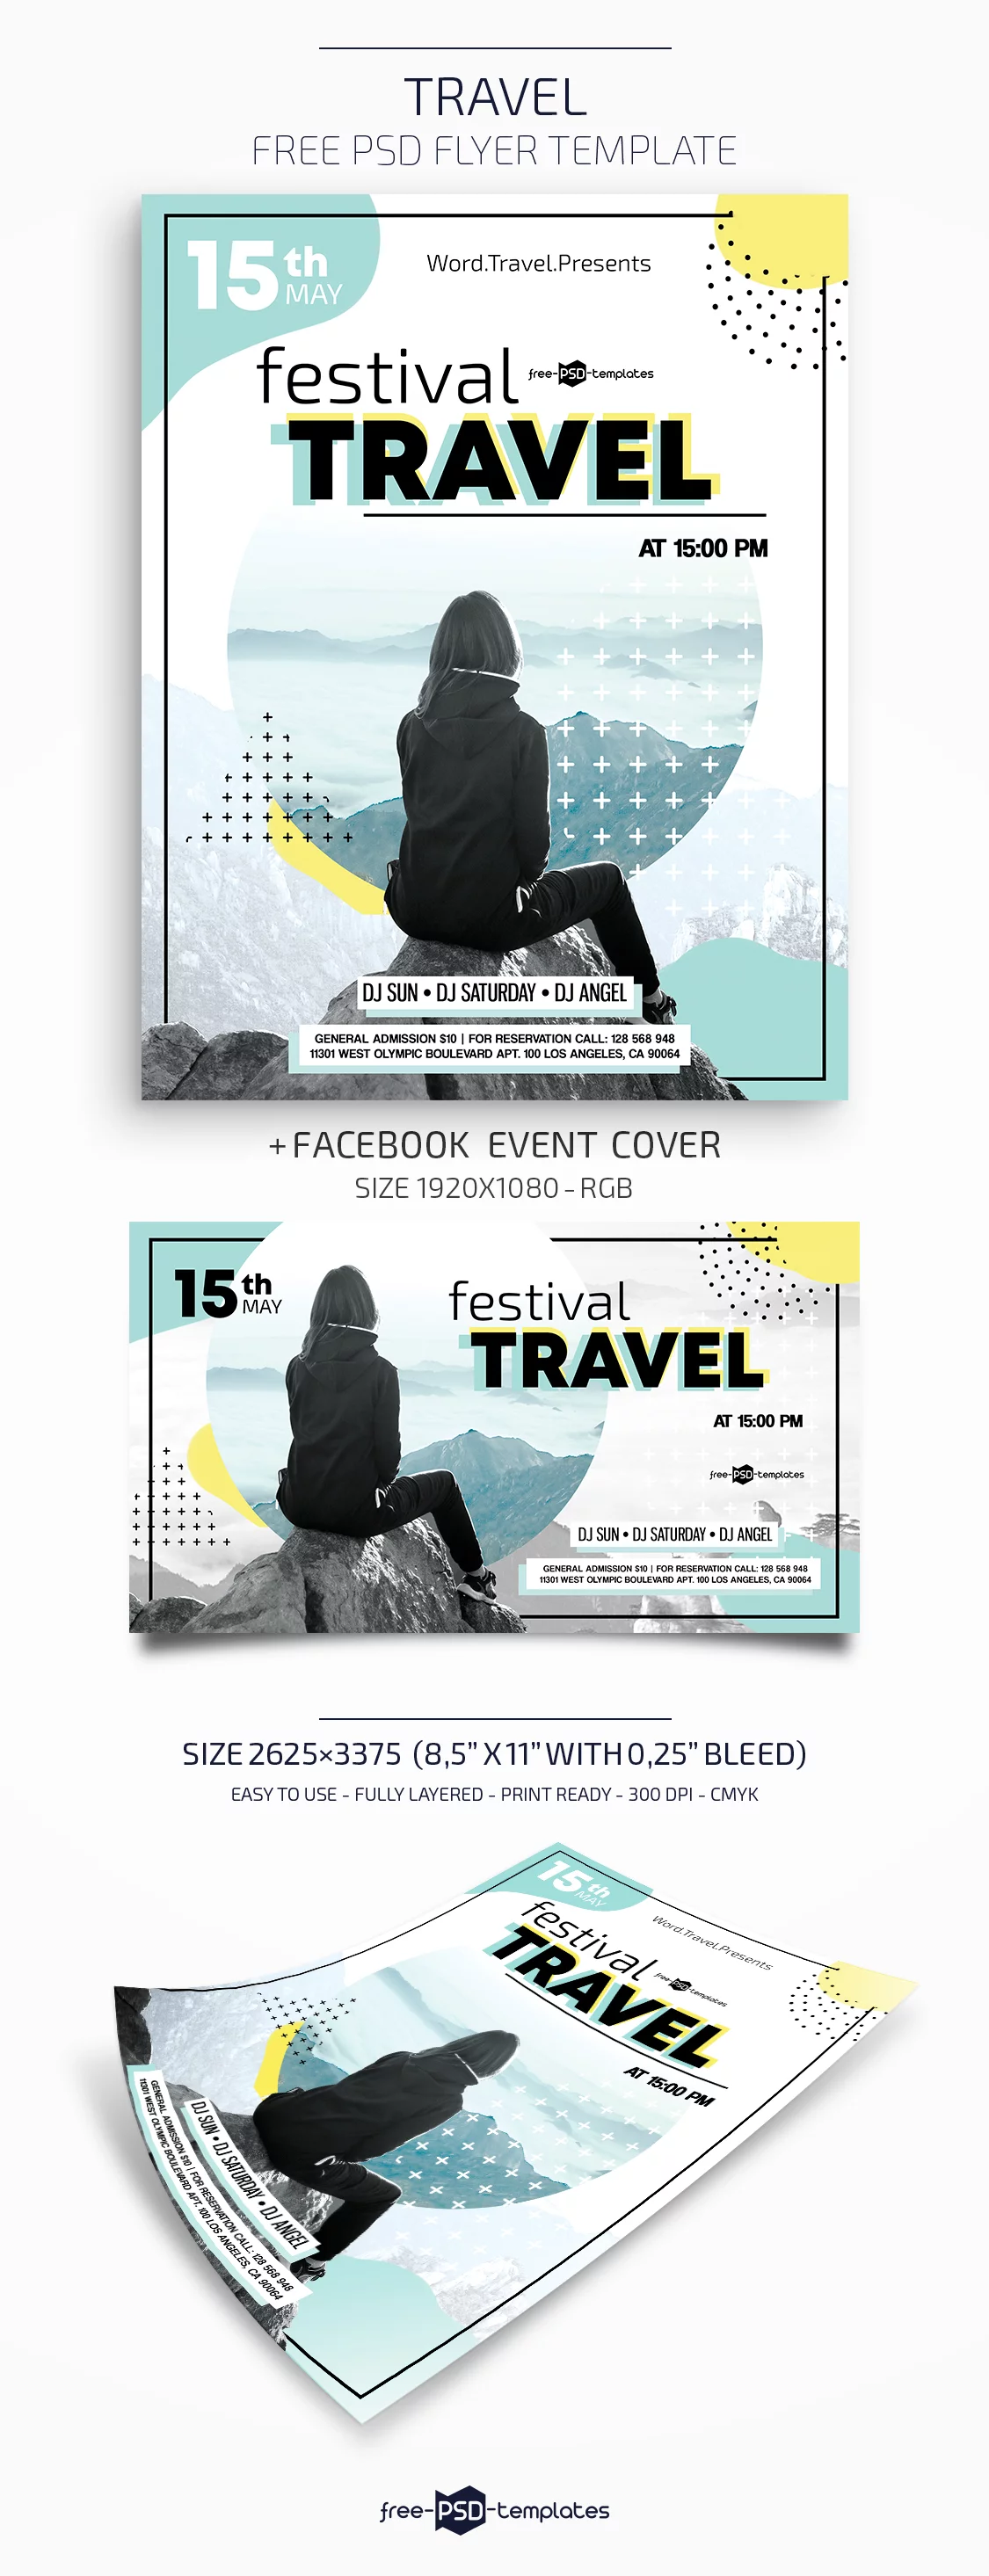 Free Travel Flyer in PSD